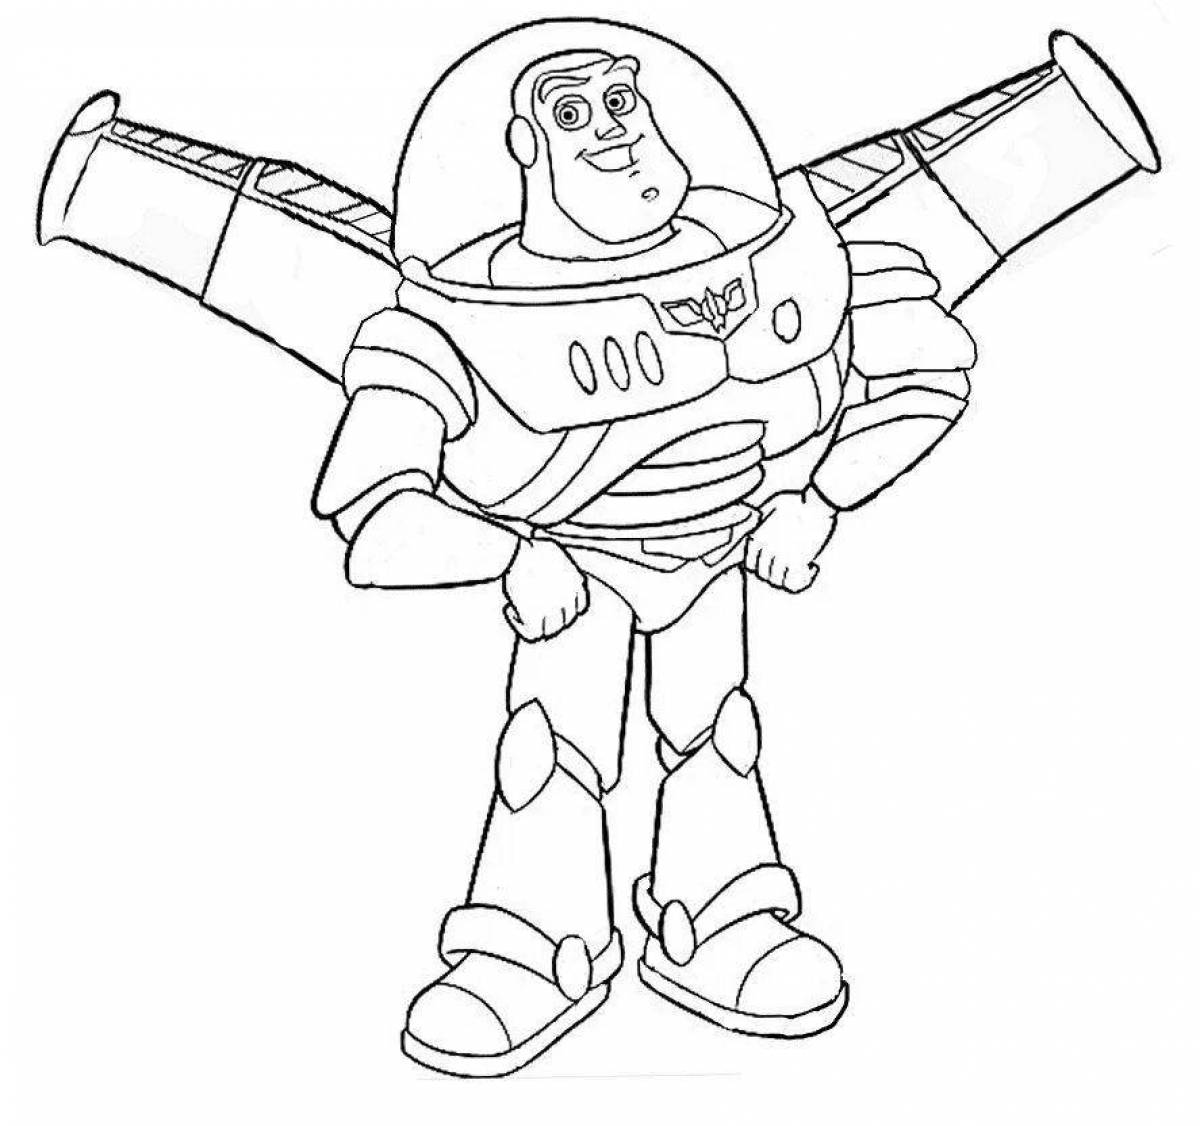 Buzz lightyear live coloring